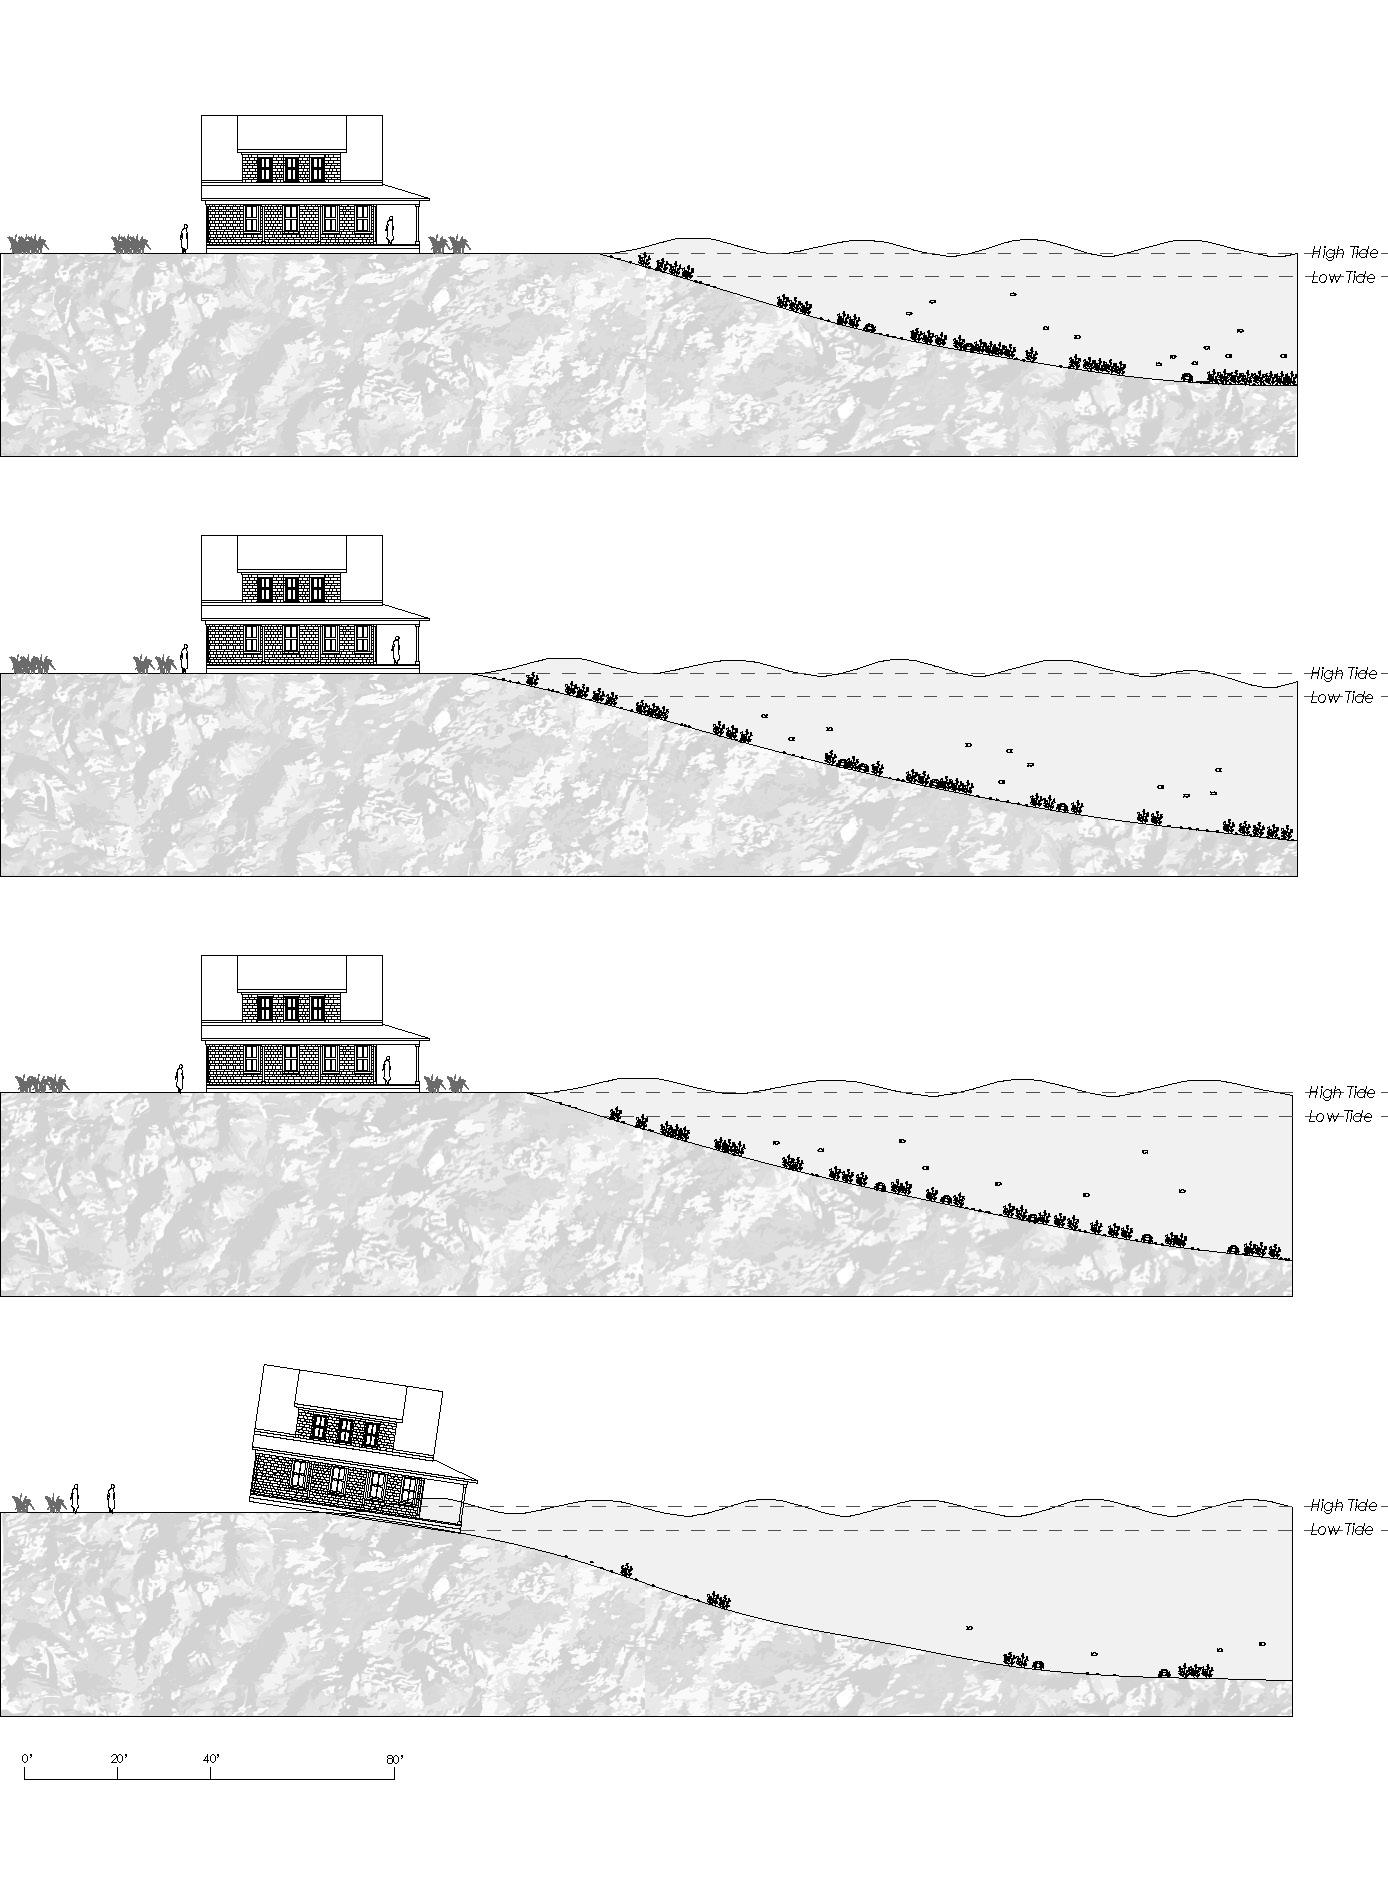 Series of sections showing effects of coastal erosion without any interventions.